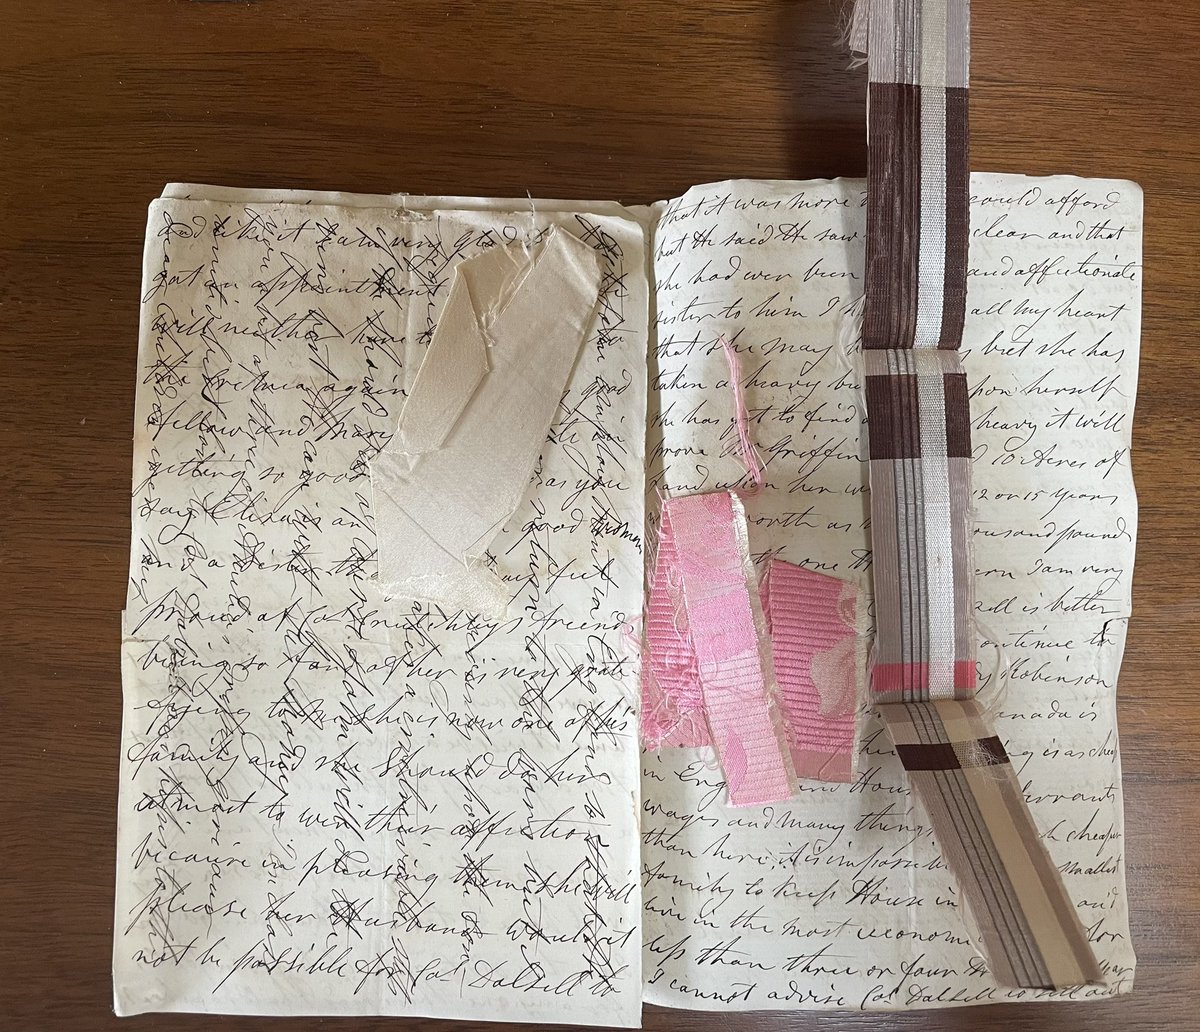 An exciting find in this letter from 1855: fabric swatches, bright as the day they were enclosed.